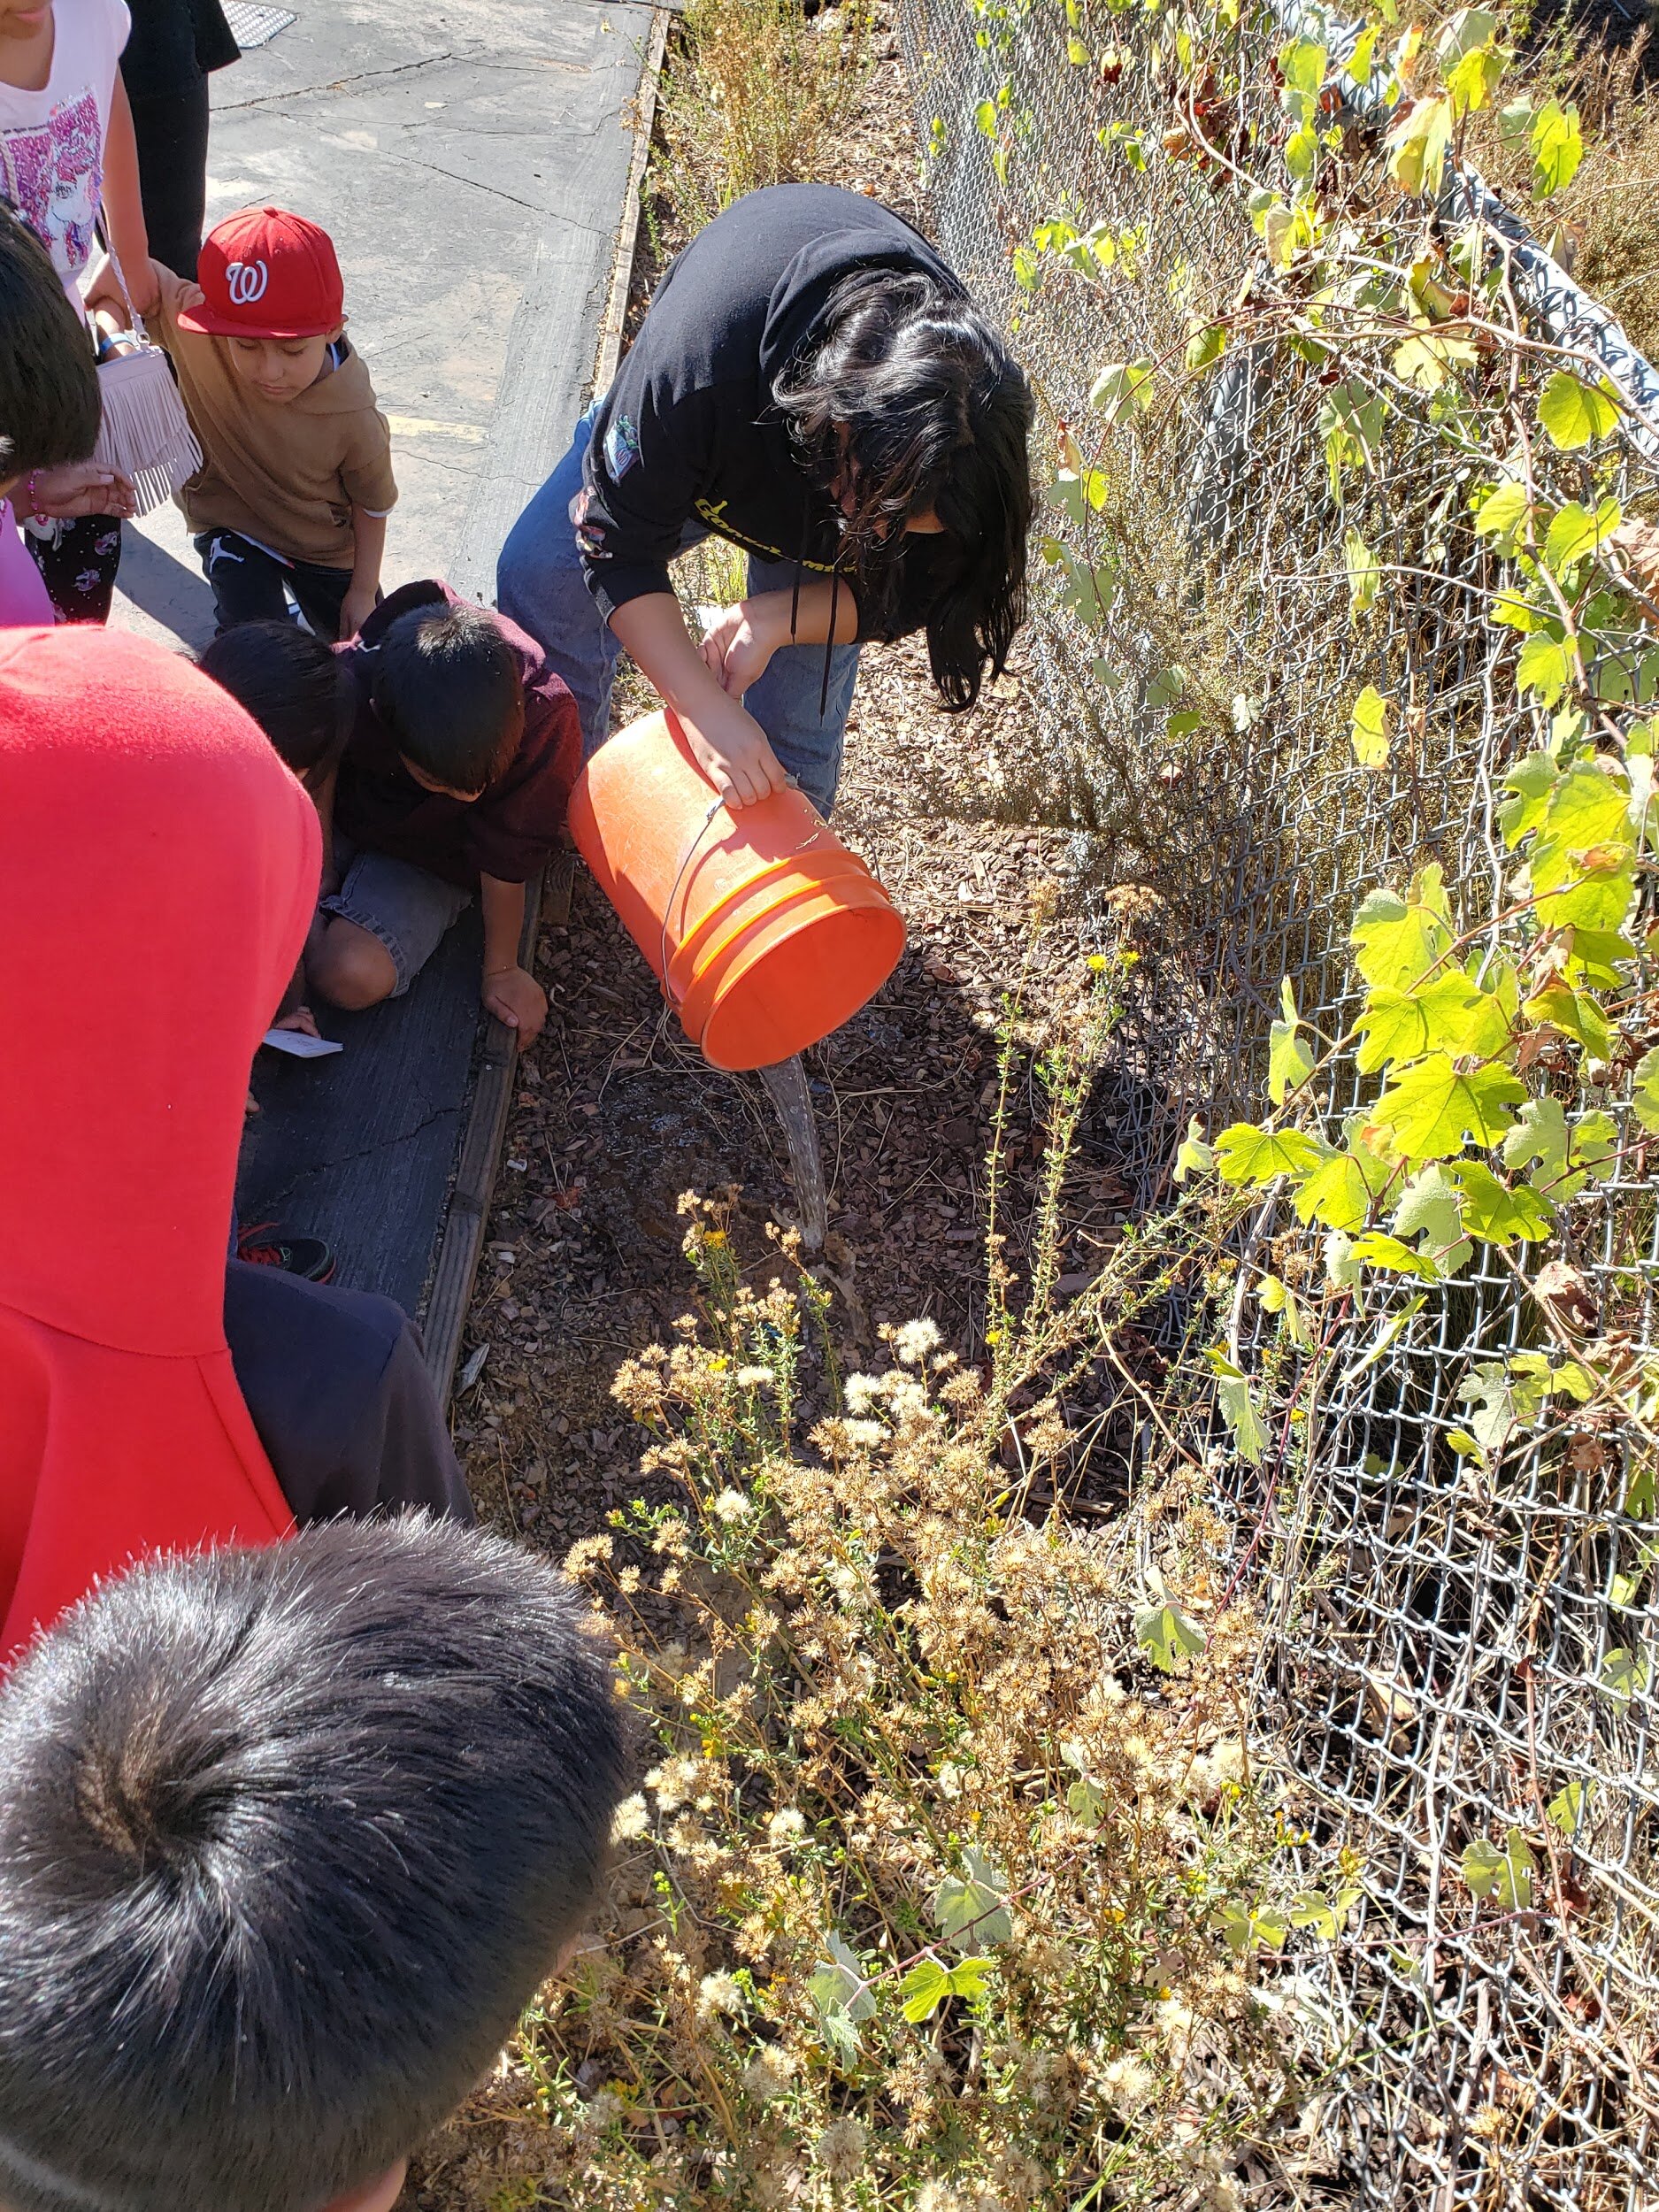  Ee360 intern, Angela, pours water on the permeable surface of the native habitat as students observe 